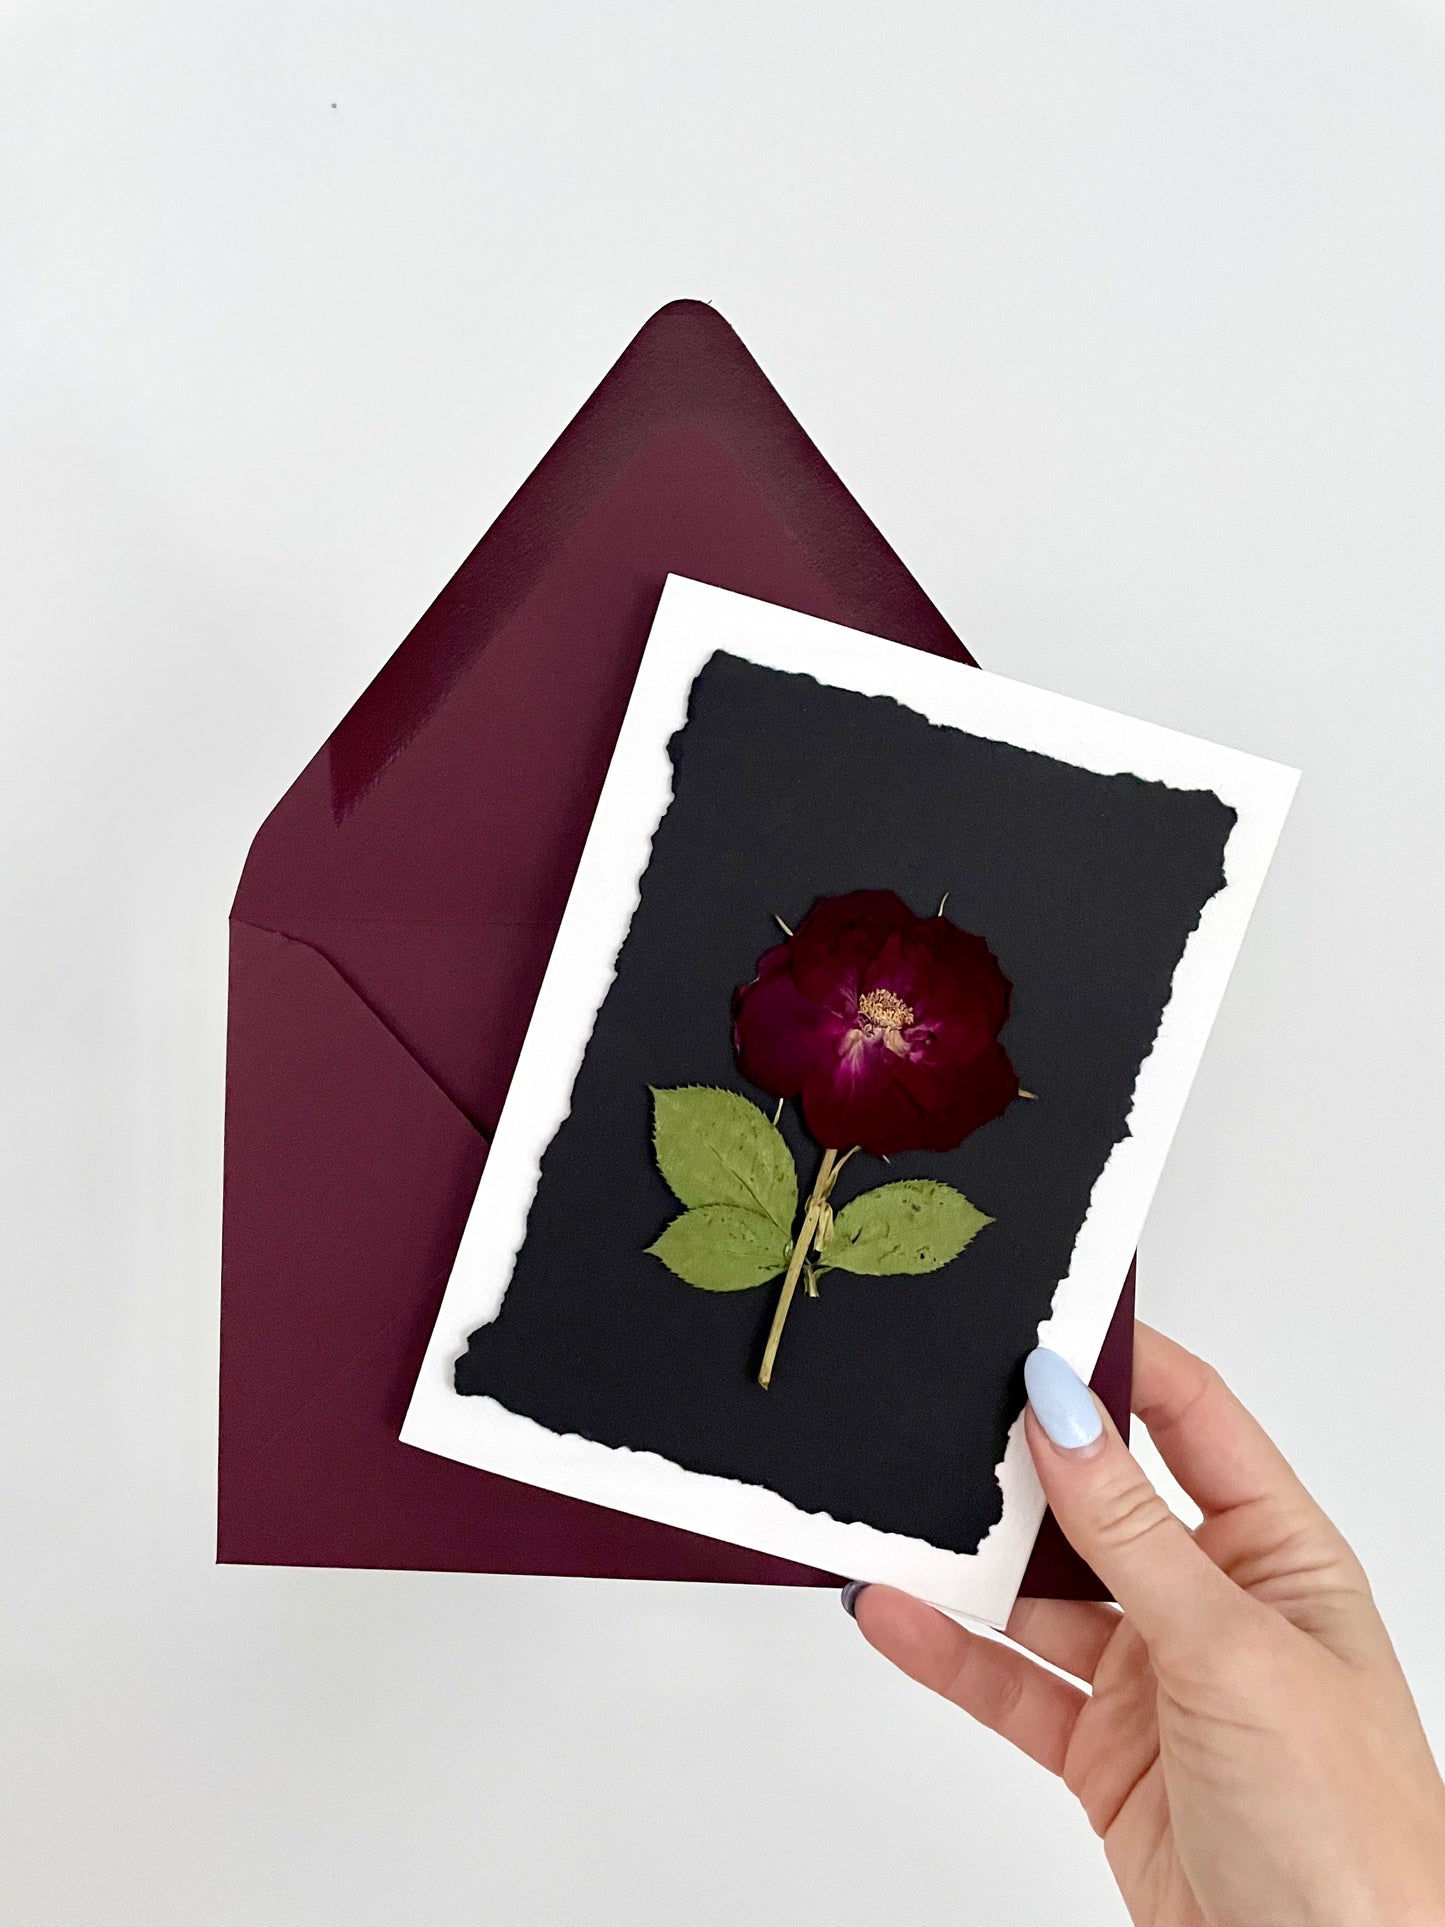 Forever Rose Valentine's Day Cards, Assortment of Handcrafted Cards with Real Pressed Mini Roses